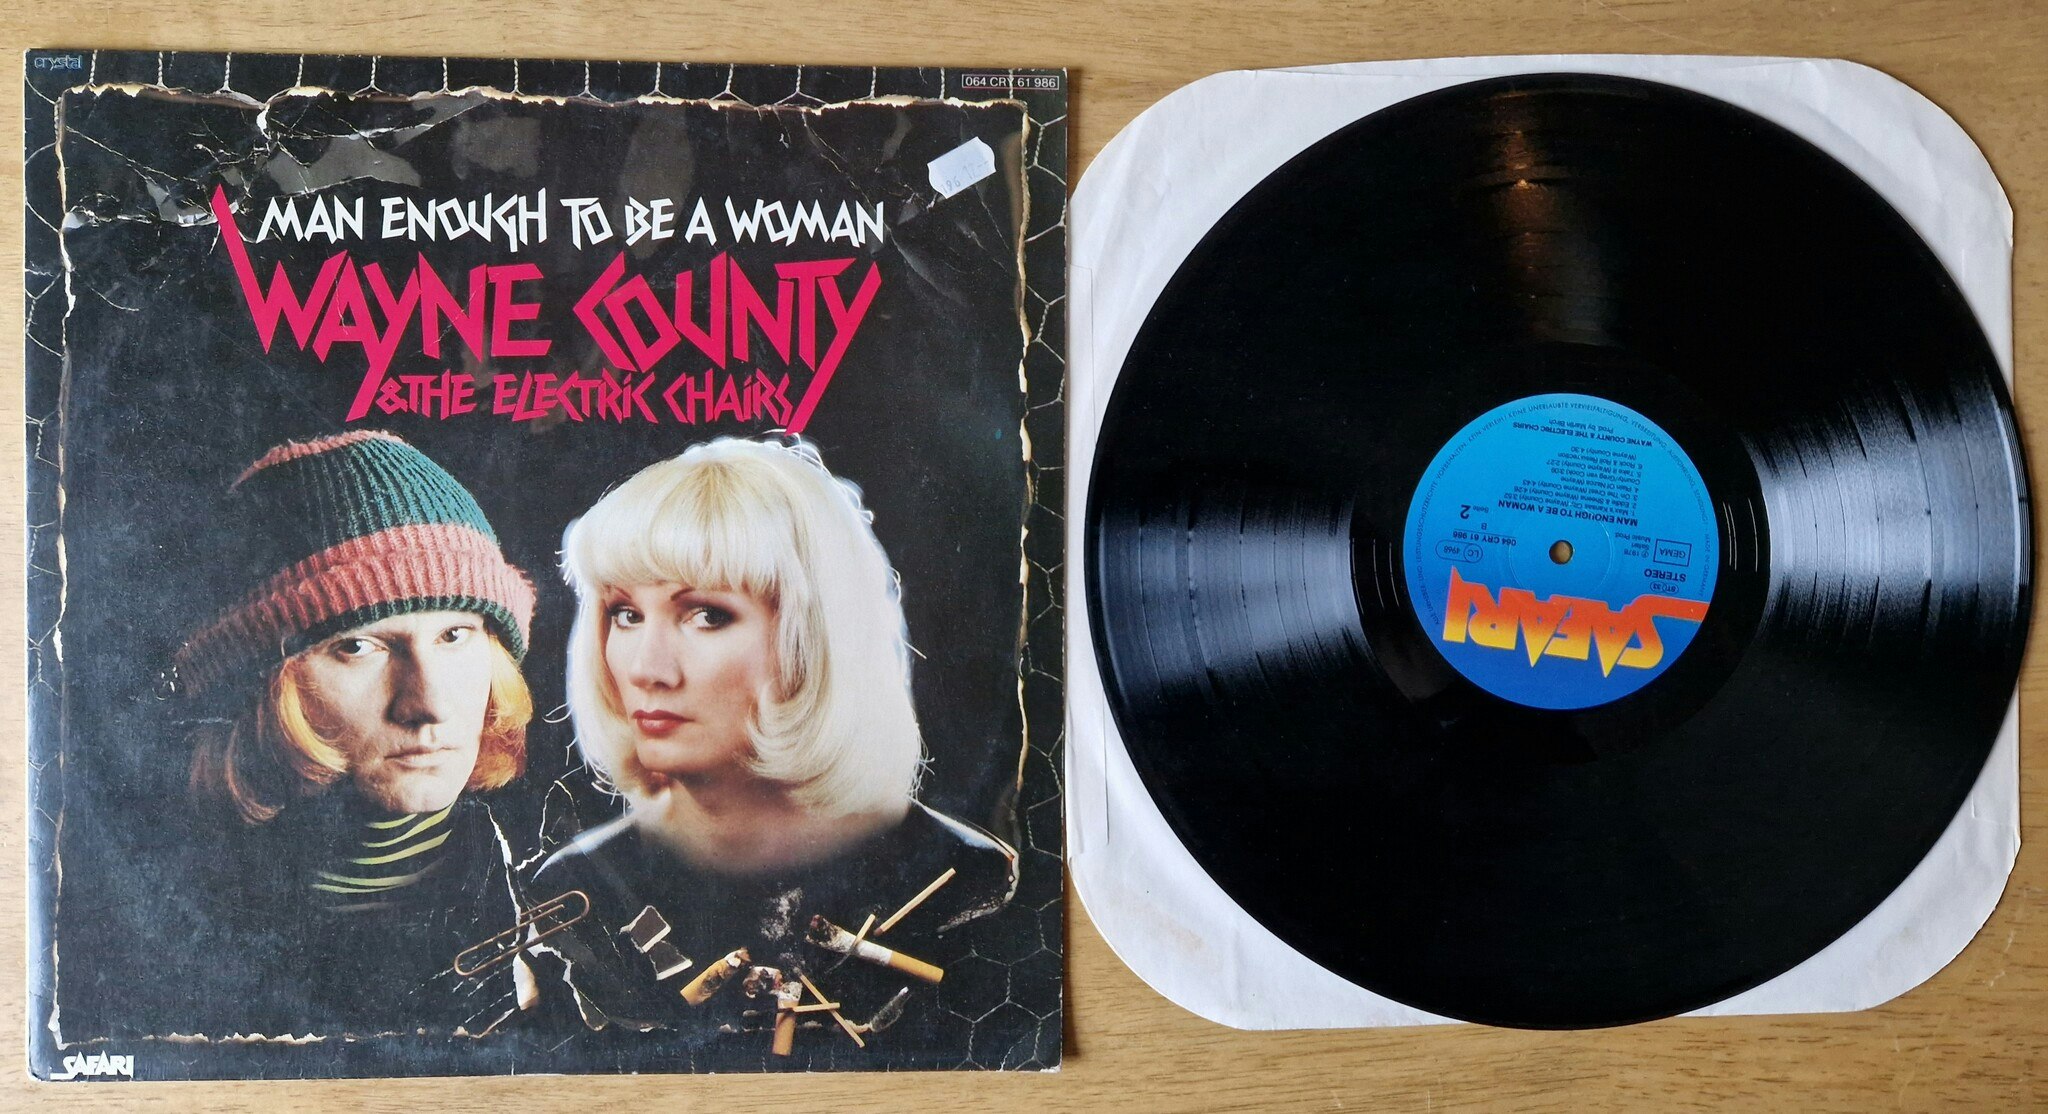 Wayne County and The Electric Chains, Man enough to be a woman. Vinyl LP